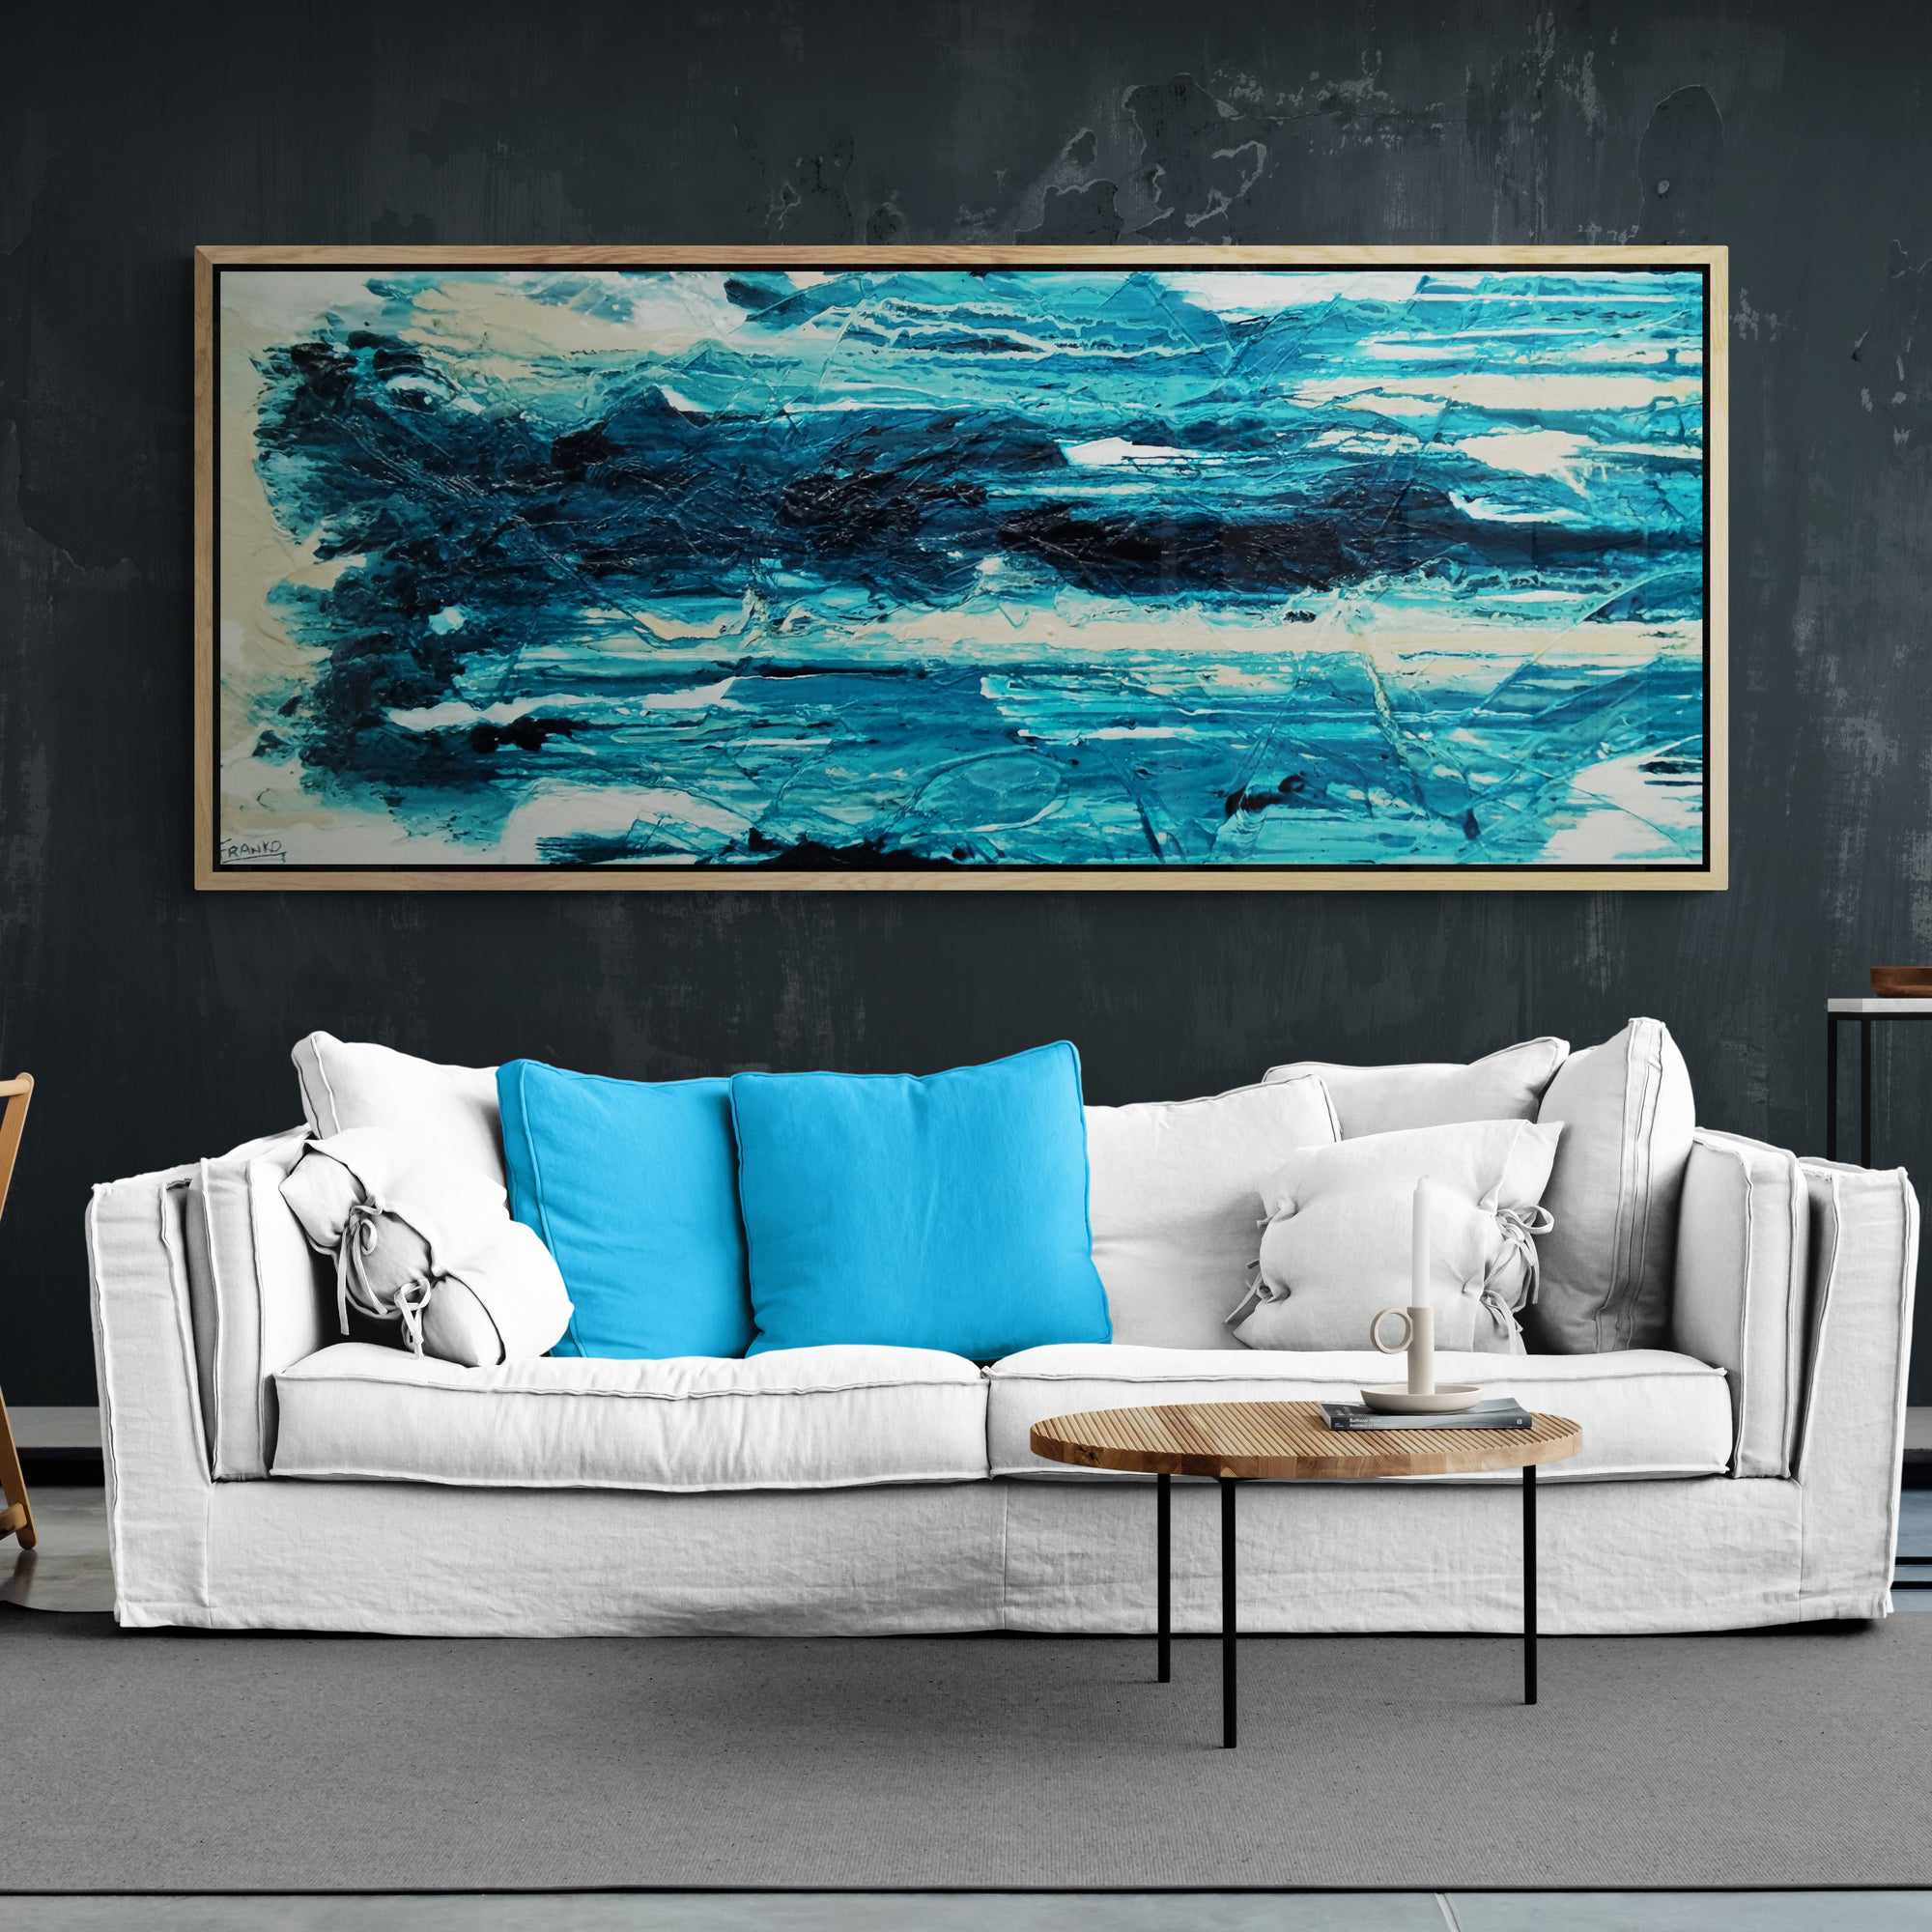 Malted Southern 200cm x 80cm Teal Cream White Textured Abstract Painting-Abstract-Franko-[franko_artist]-[Art]-[interior_design]-Franklin Art Studio